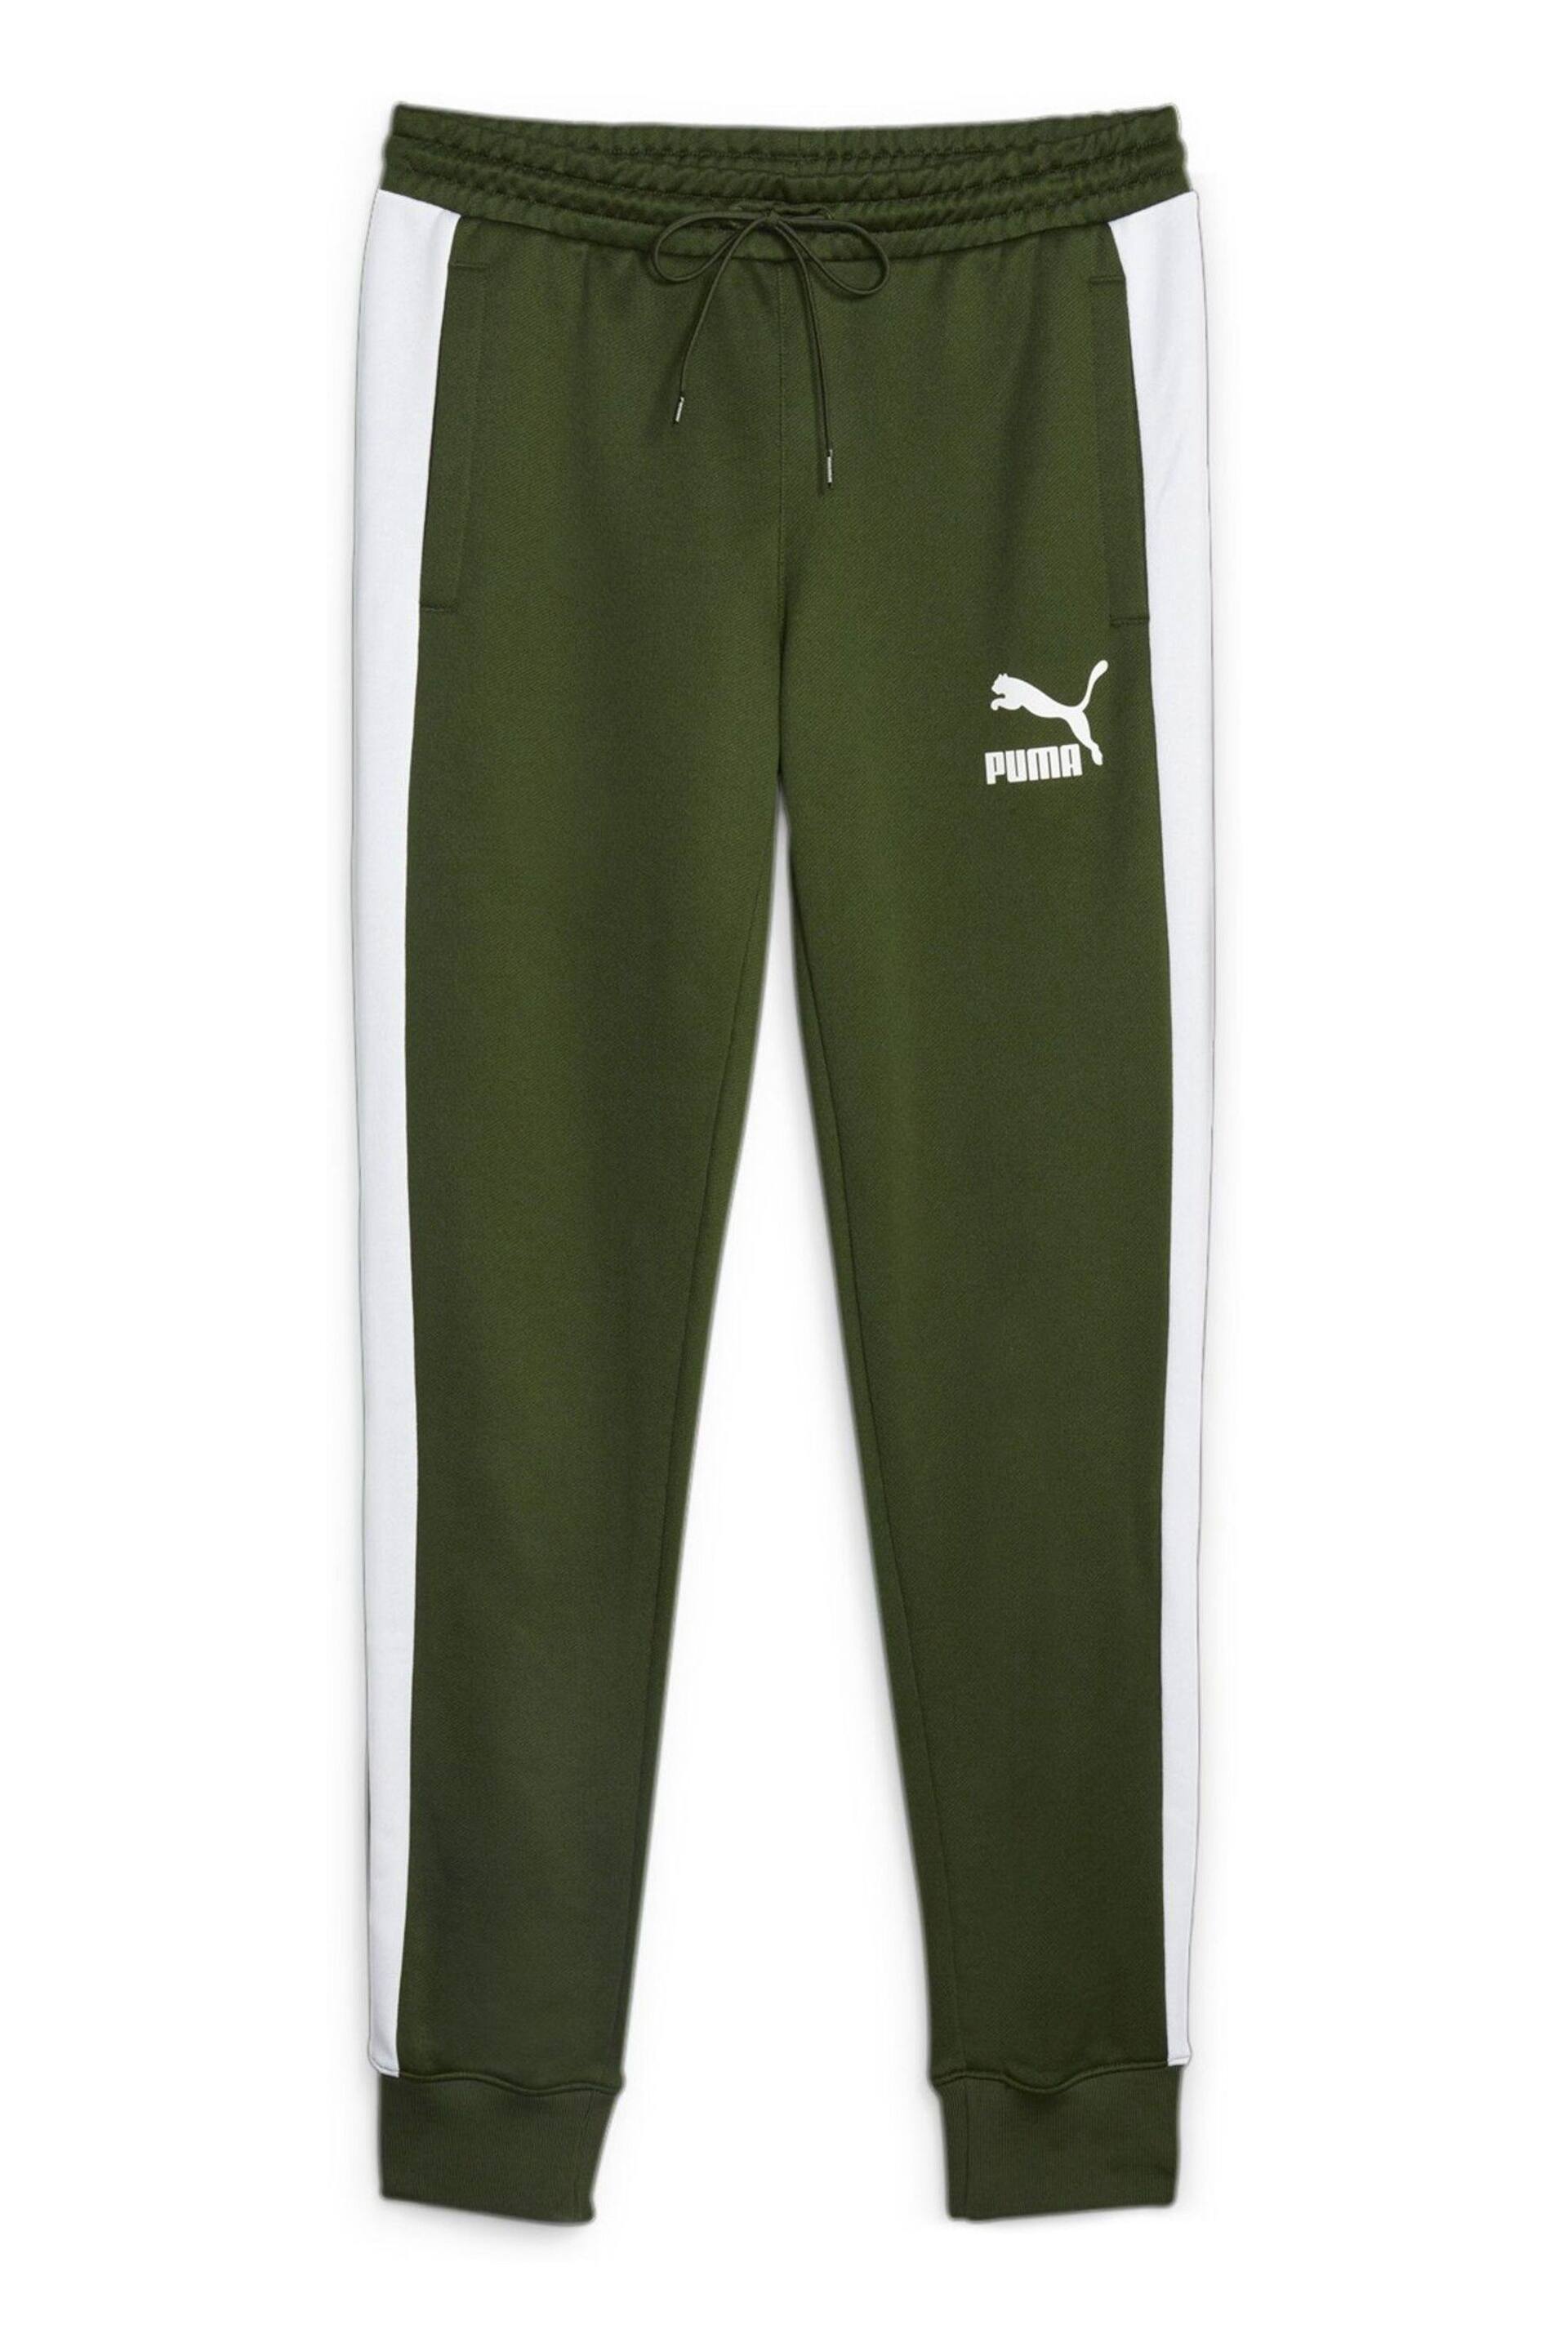 Puma Green T7 Iconic Mens Track Joggers - Image 6 of 7